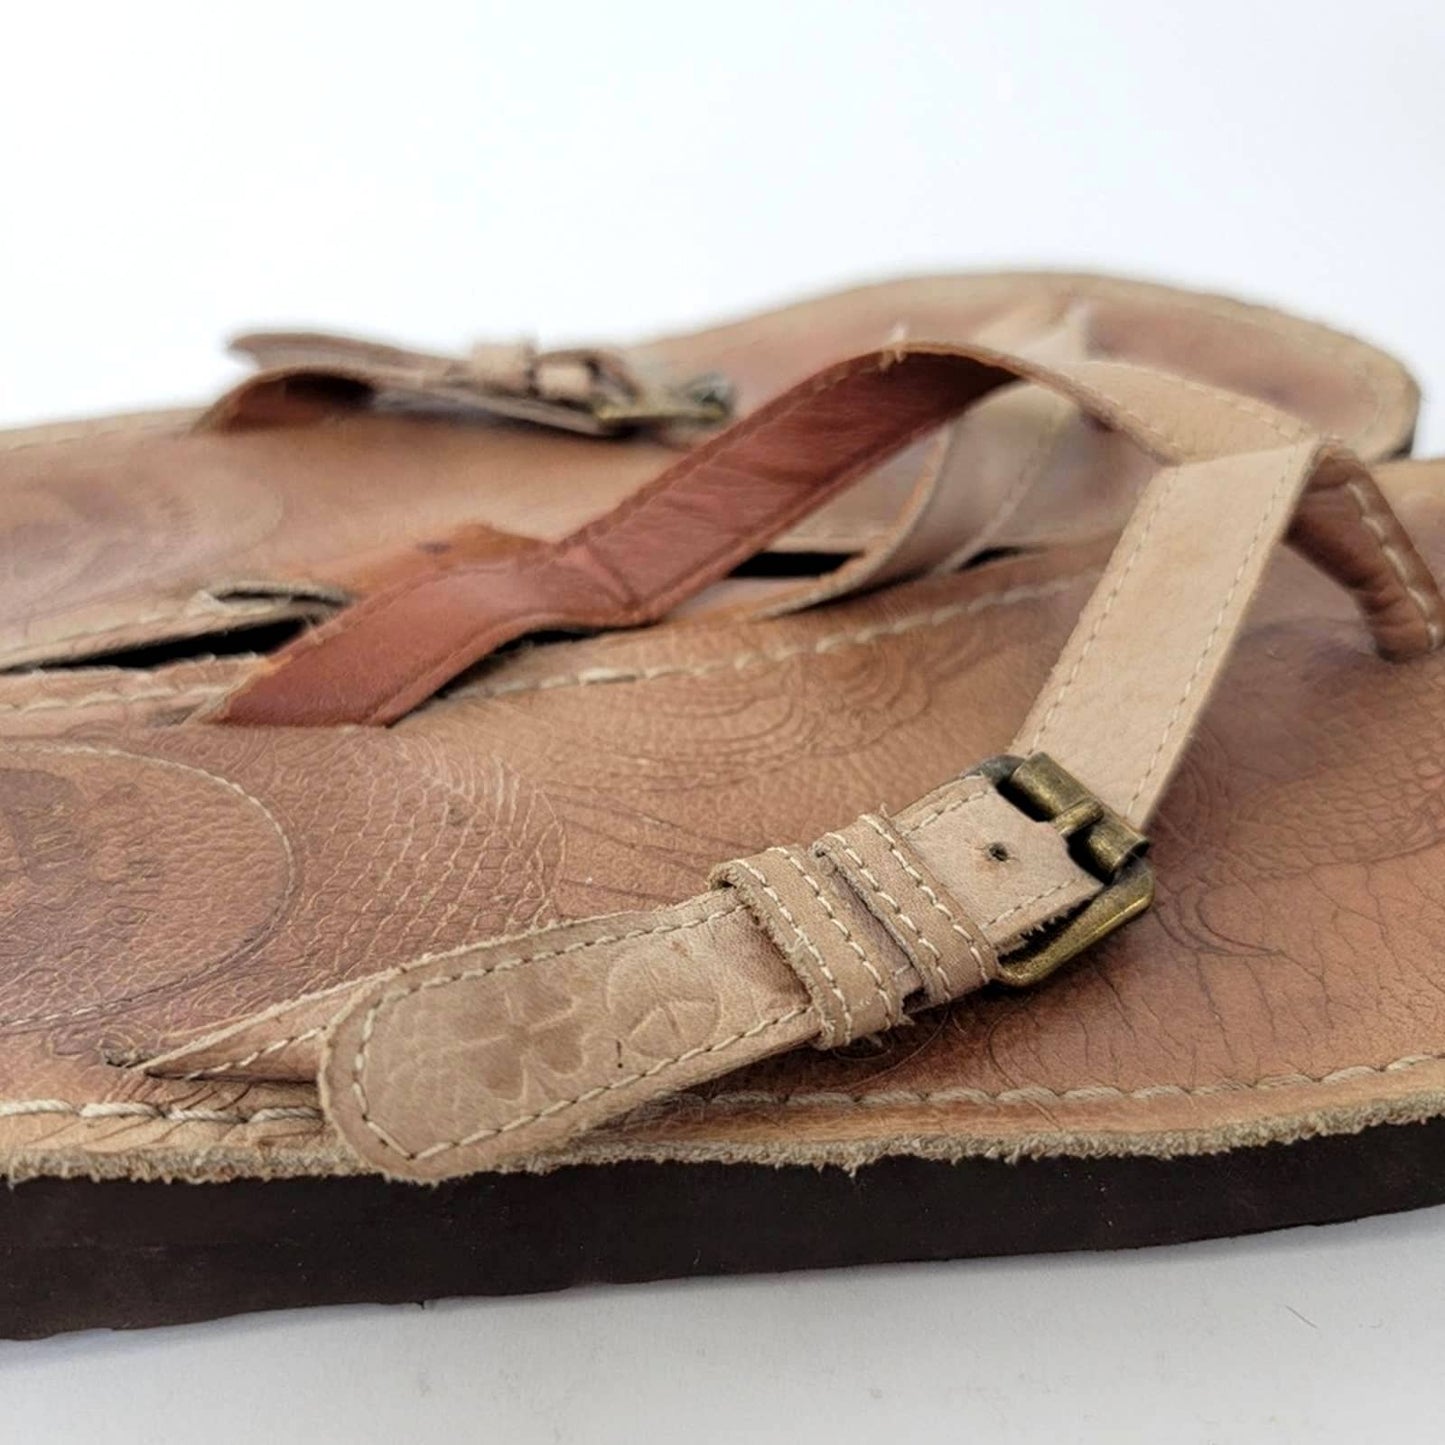 Lucky Brand Leather Buckle Embroidered Boho Thong Sandals - 7